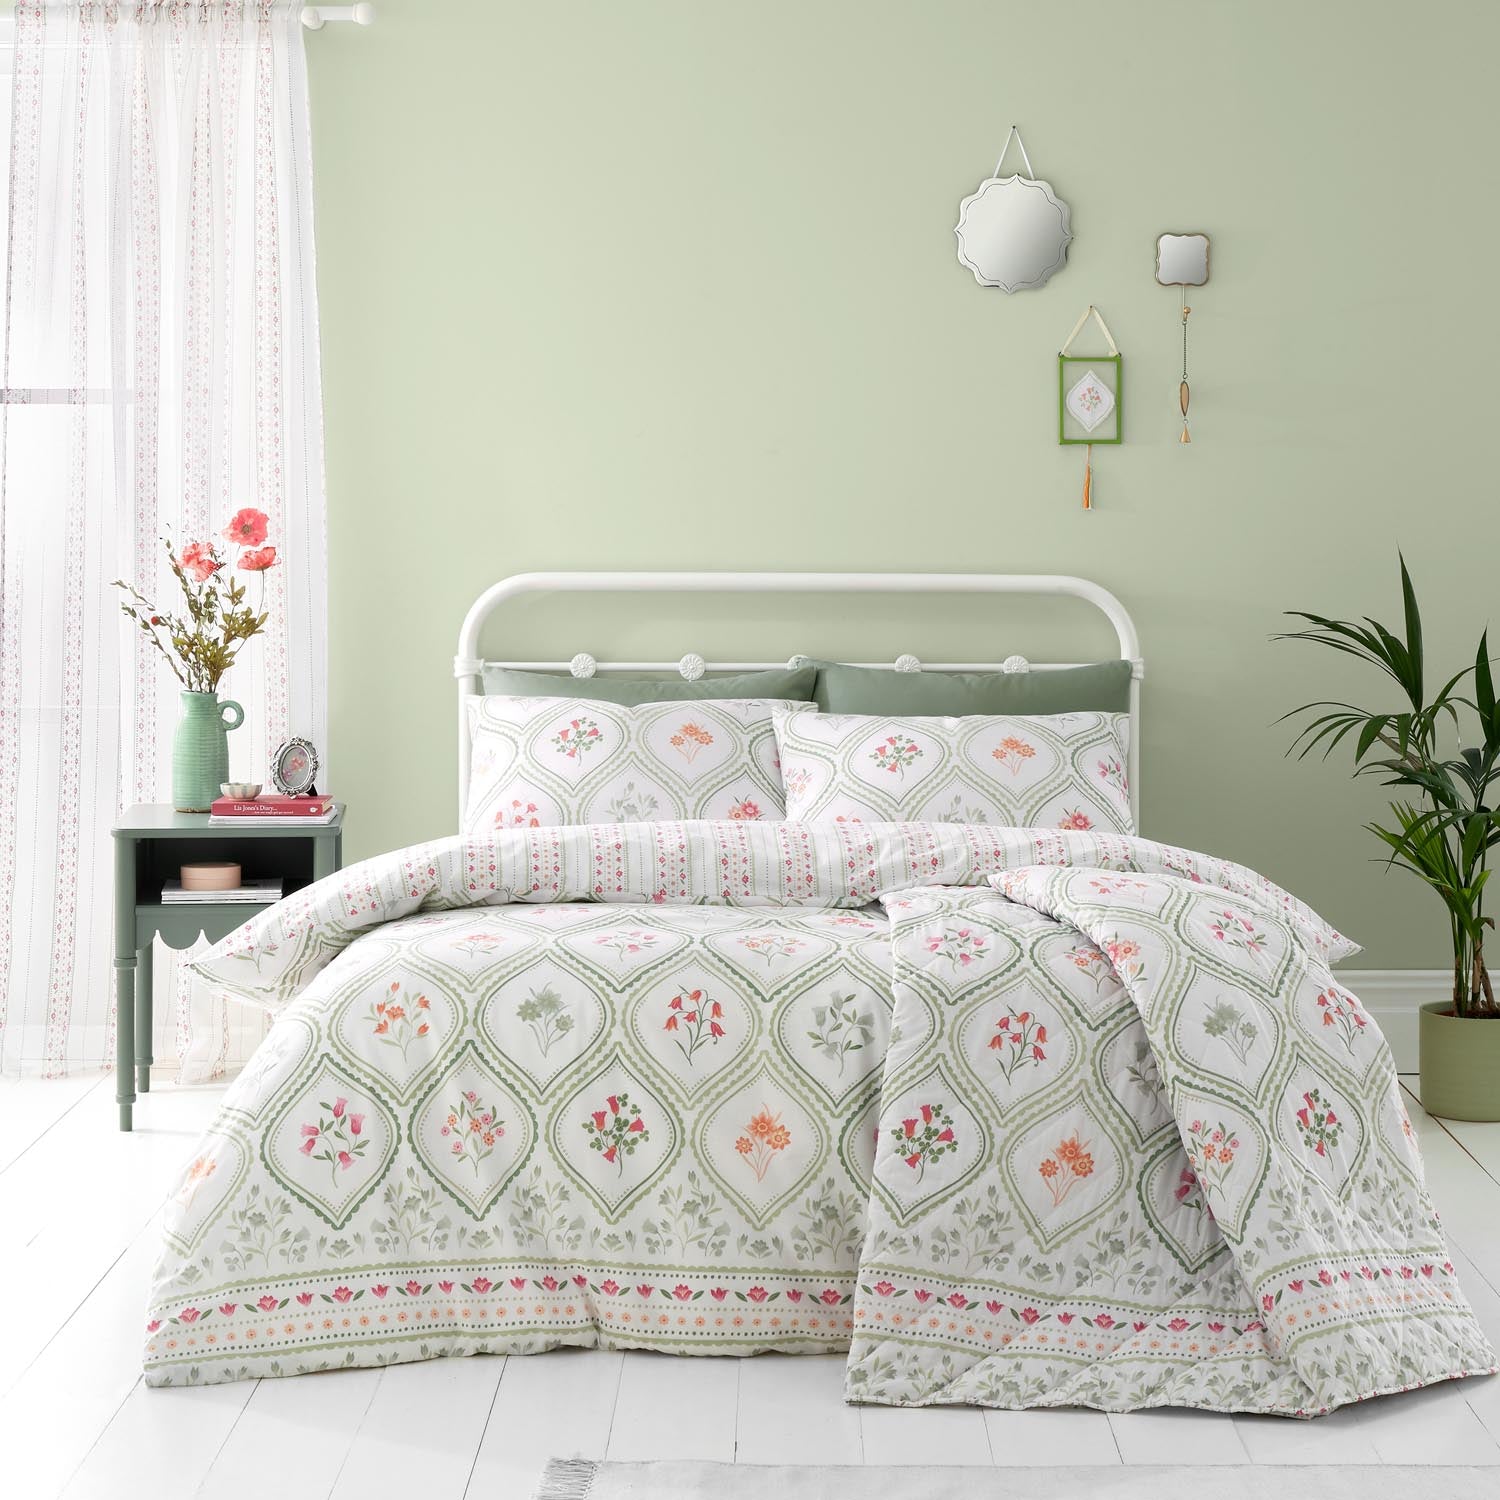 The Home Luxury Collection Trellis Floral Duvet Cover Set 1 Shaws Department Stores